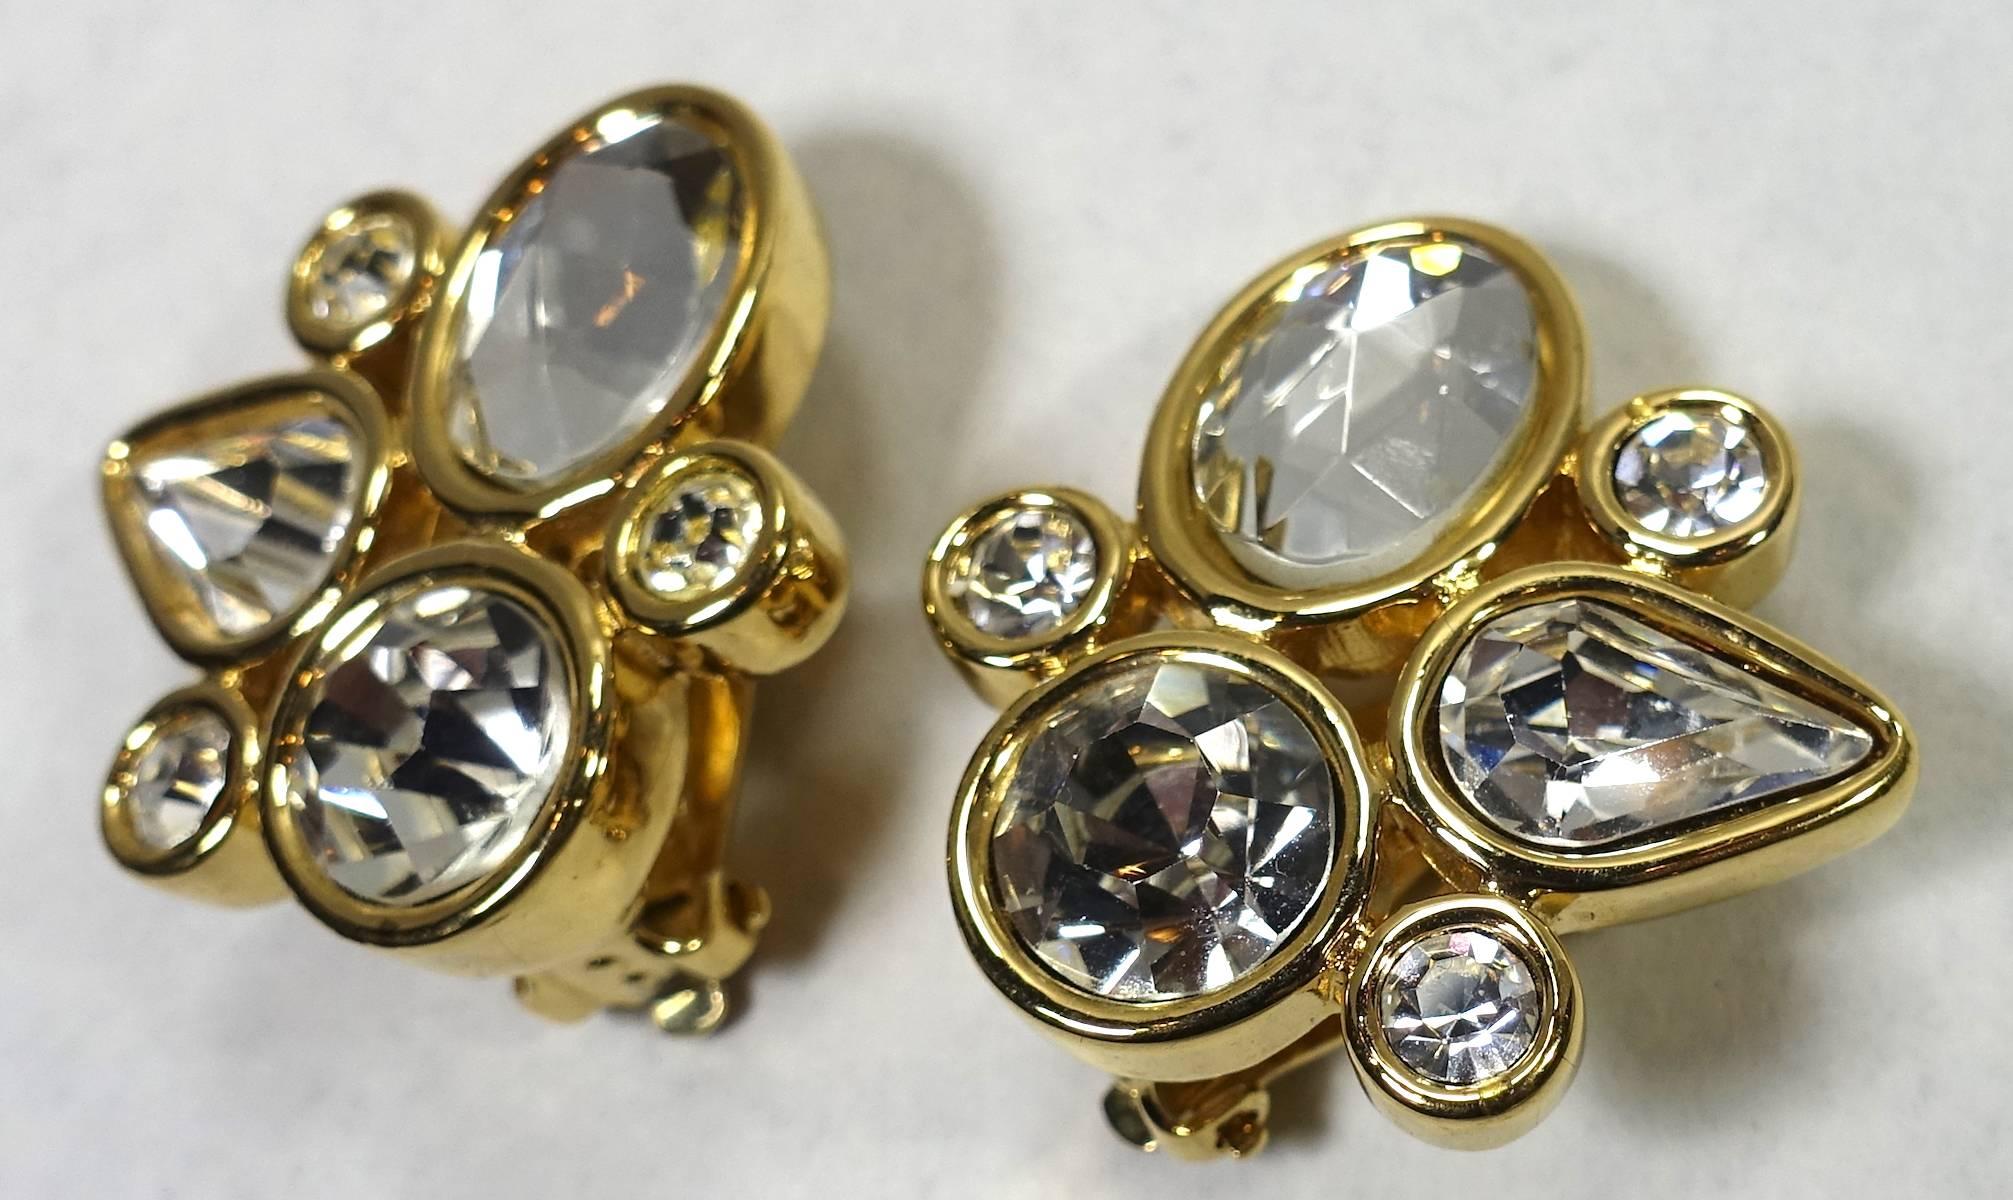 These vintage Givenchy earrings have an abstract design combining different shaped crystals bezel in a gold tone setting.  These clip earrings measure 1-1/8” x 1-1/8” and are signed “Givenchy”.  They are in excellent condition.